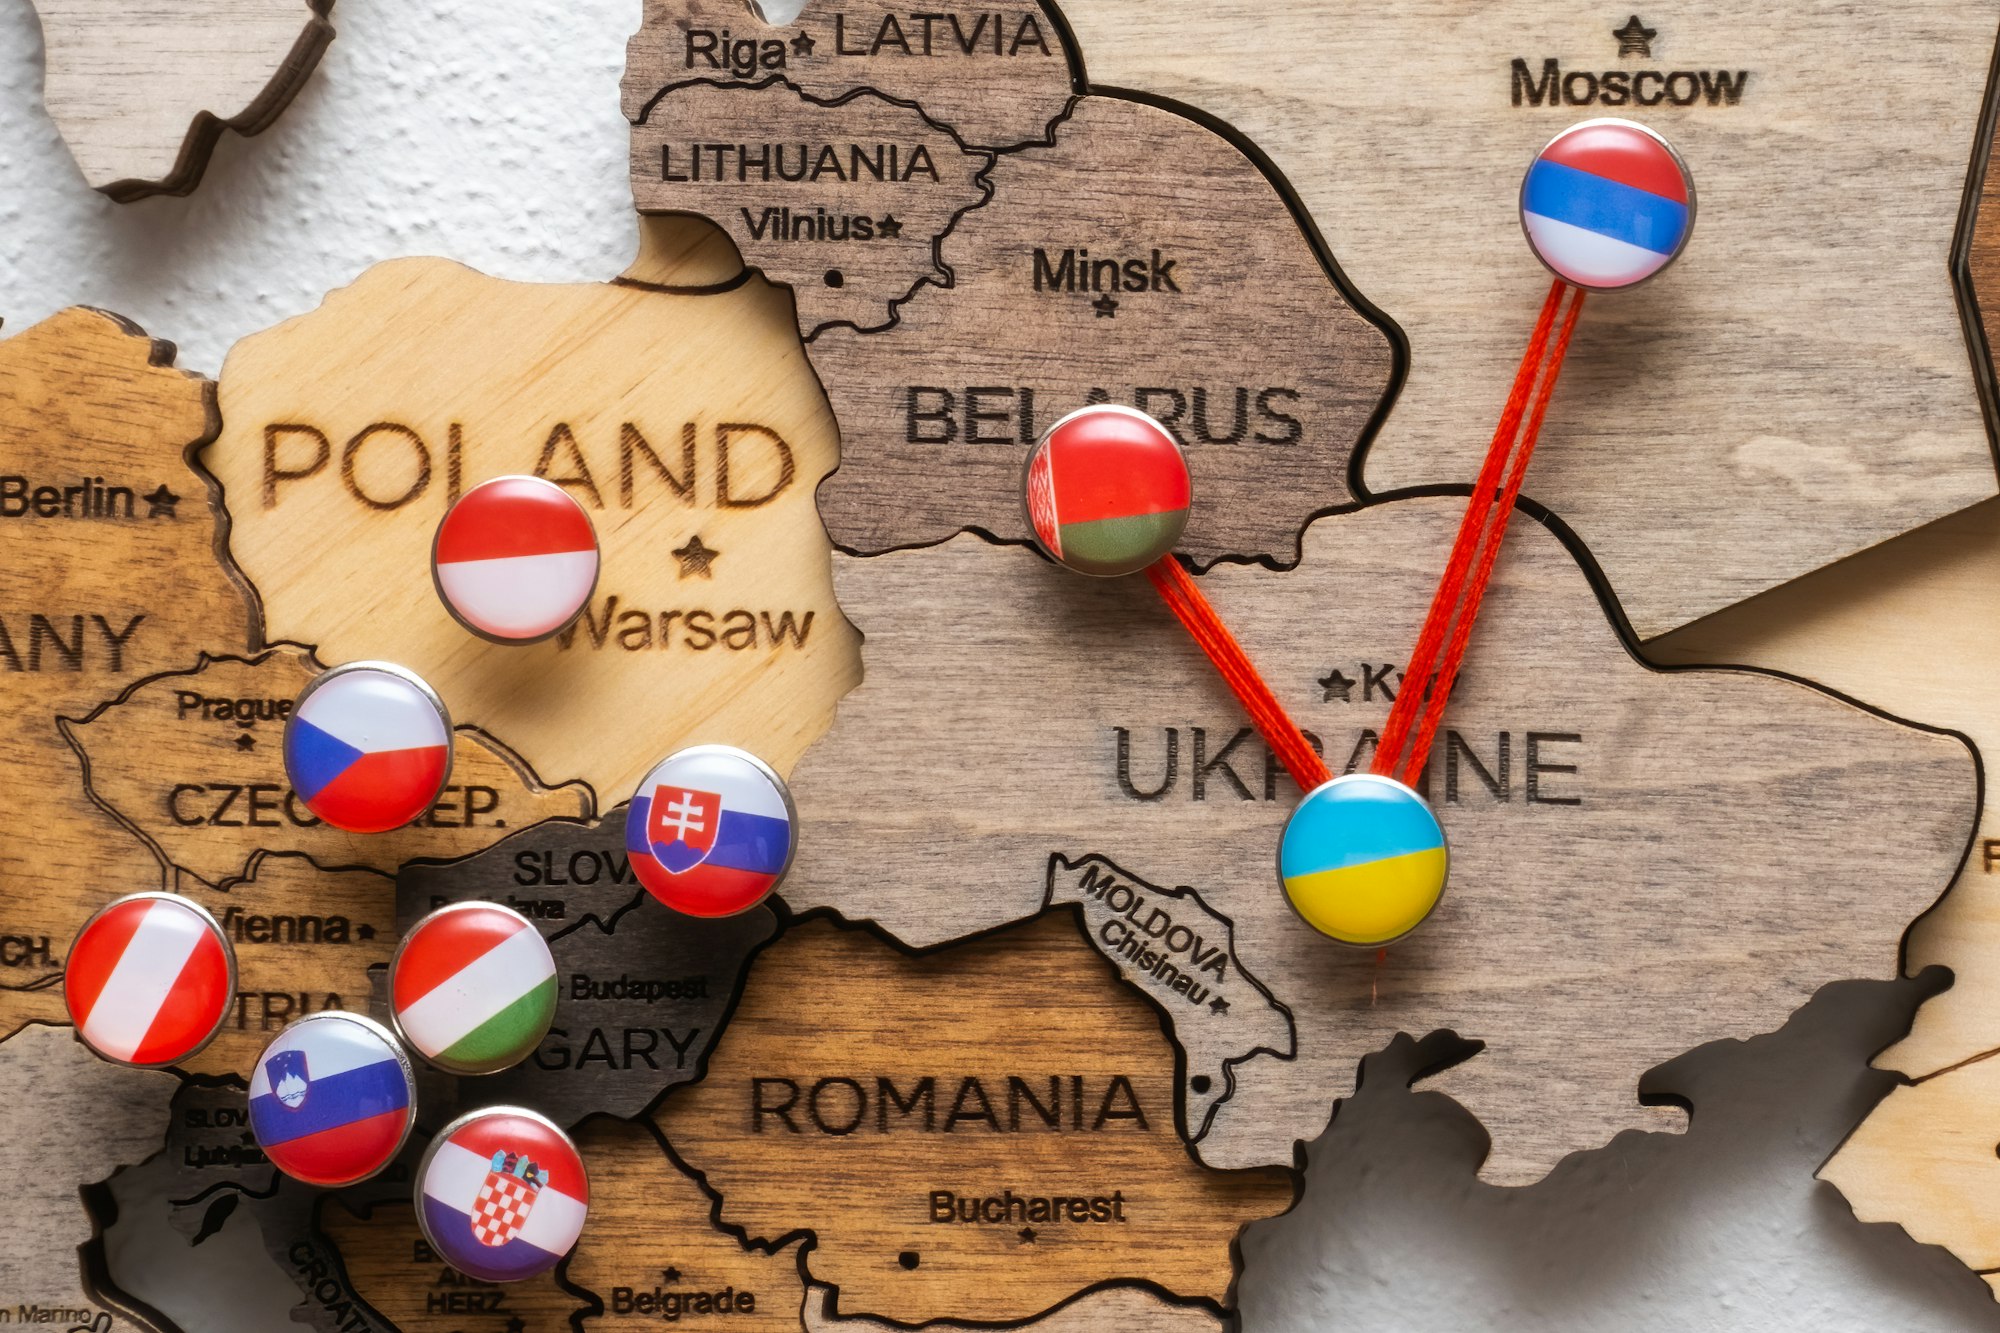 Pins with flags and threads on the wooden maps demonstrate Russia and Belarus aggression in Ukraine